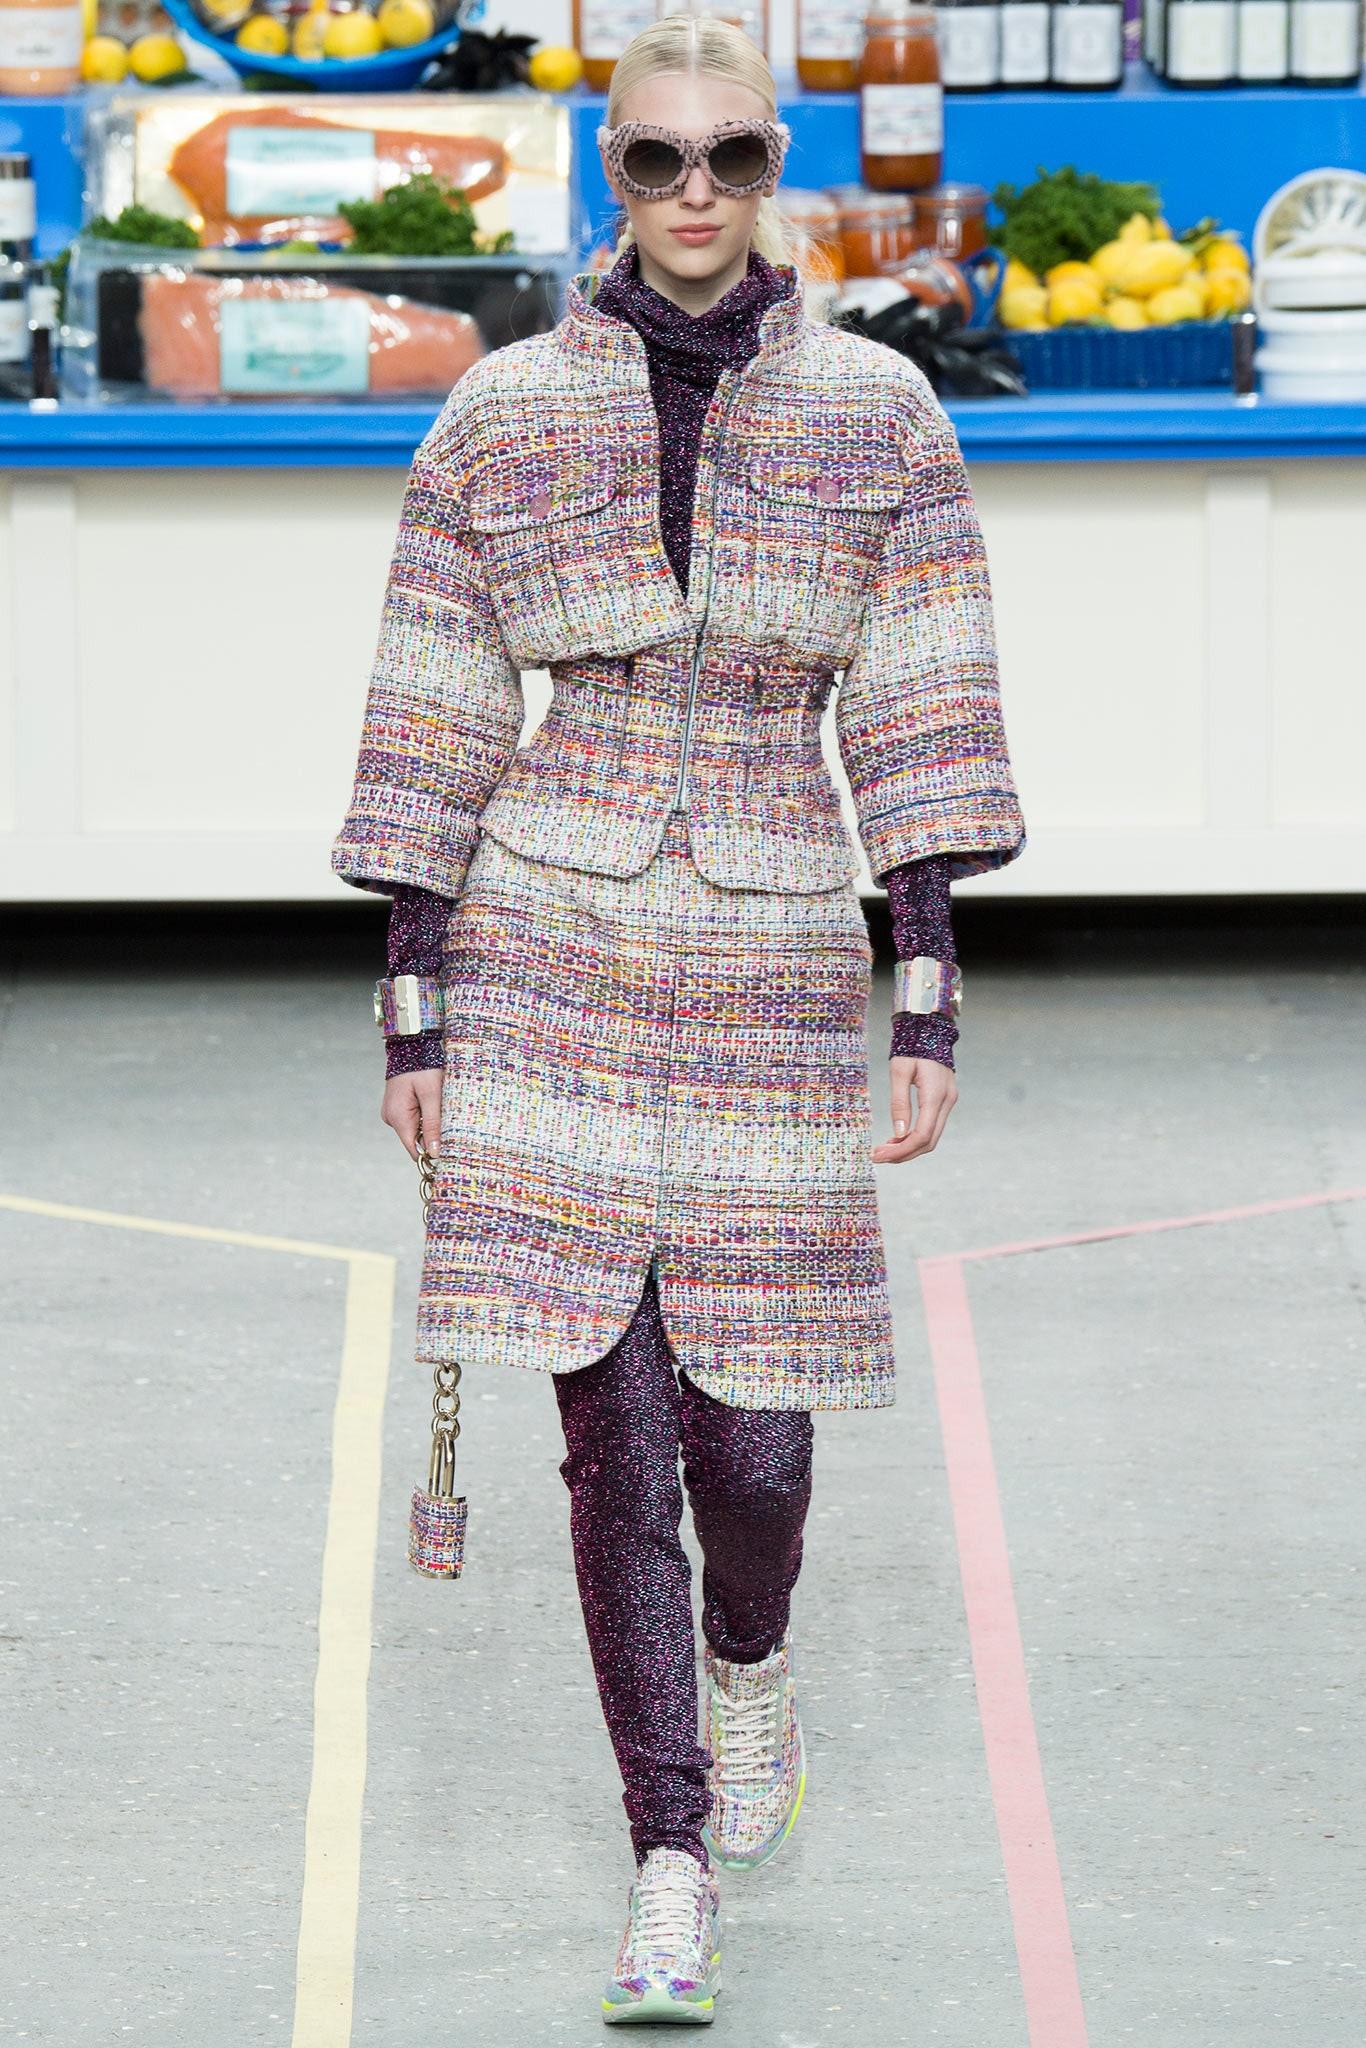 Chanel tweed structured jacket from Runway ''Supermarket'' Collection by Karl Lagerfeld. Catwalk Look #5.
Today's boutique price for similar jacket is cover 15,000€ 
˘˘˘ multicilour (burgunde, Ecru, yellow, Red) stunning Lesage tweed 
˘˘˘ two front